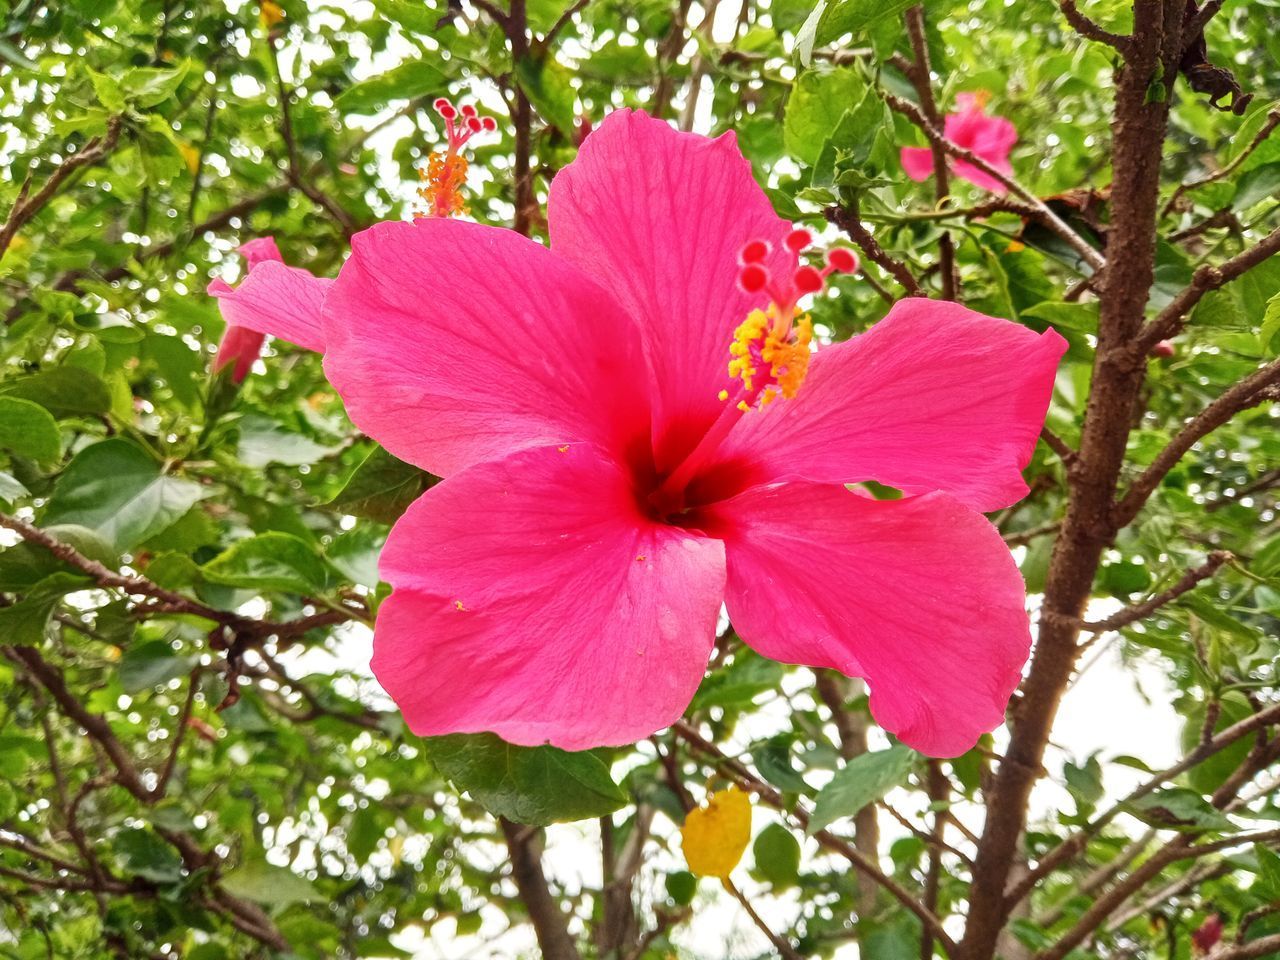 CLOSE-UP OF PINK HIBISCUS FLOWER AGAINST PLANTS